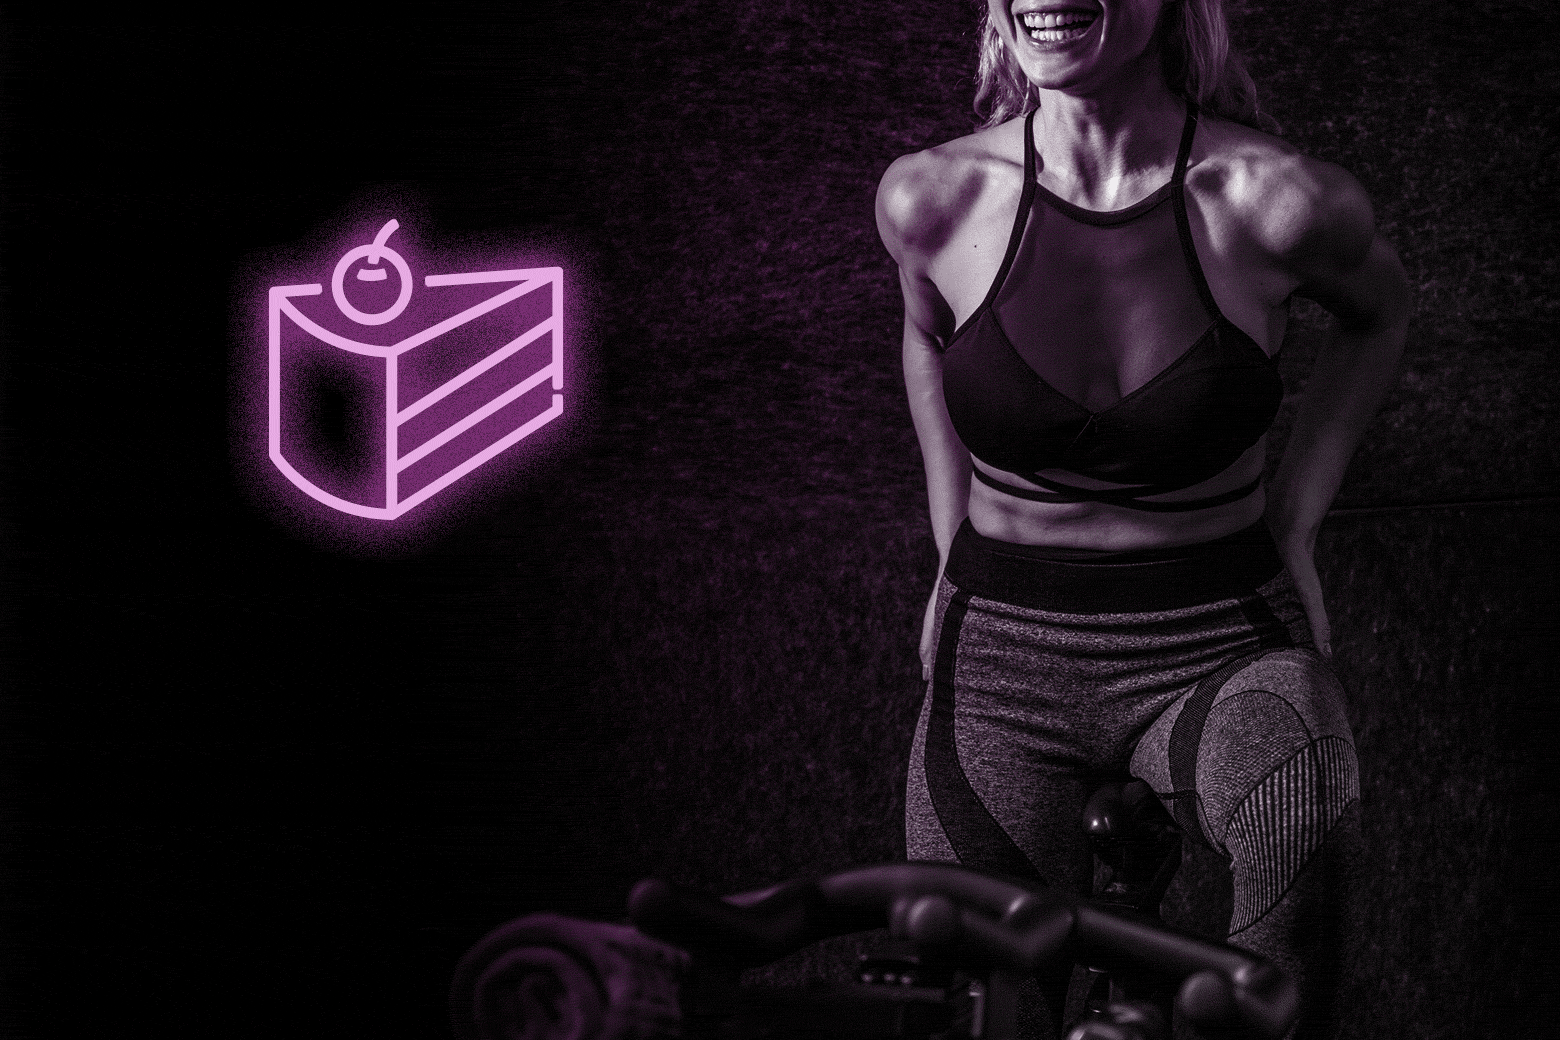 A woman rides an exercise bike next to a floating neon slice of cake.